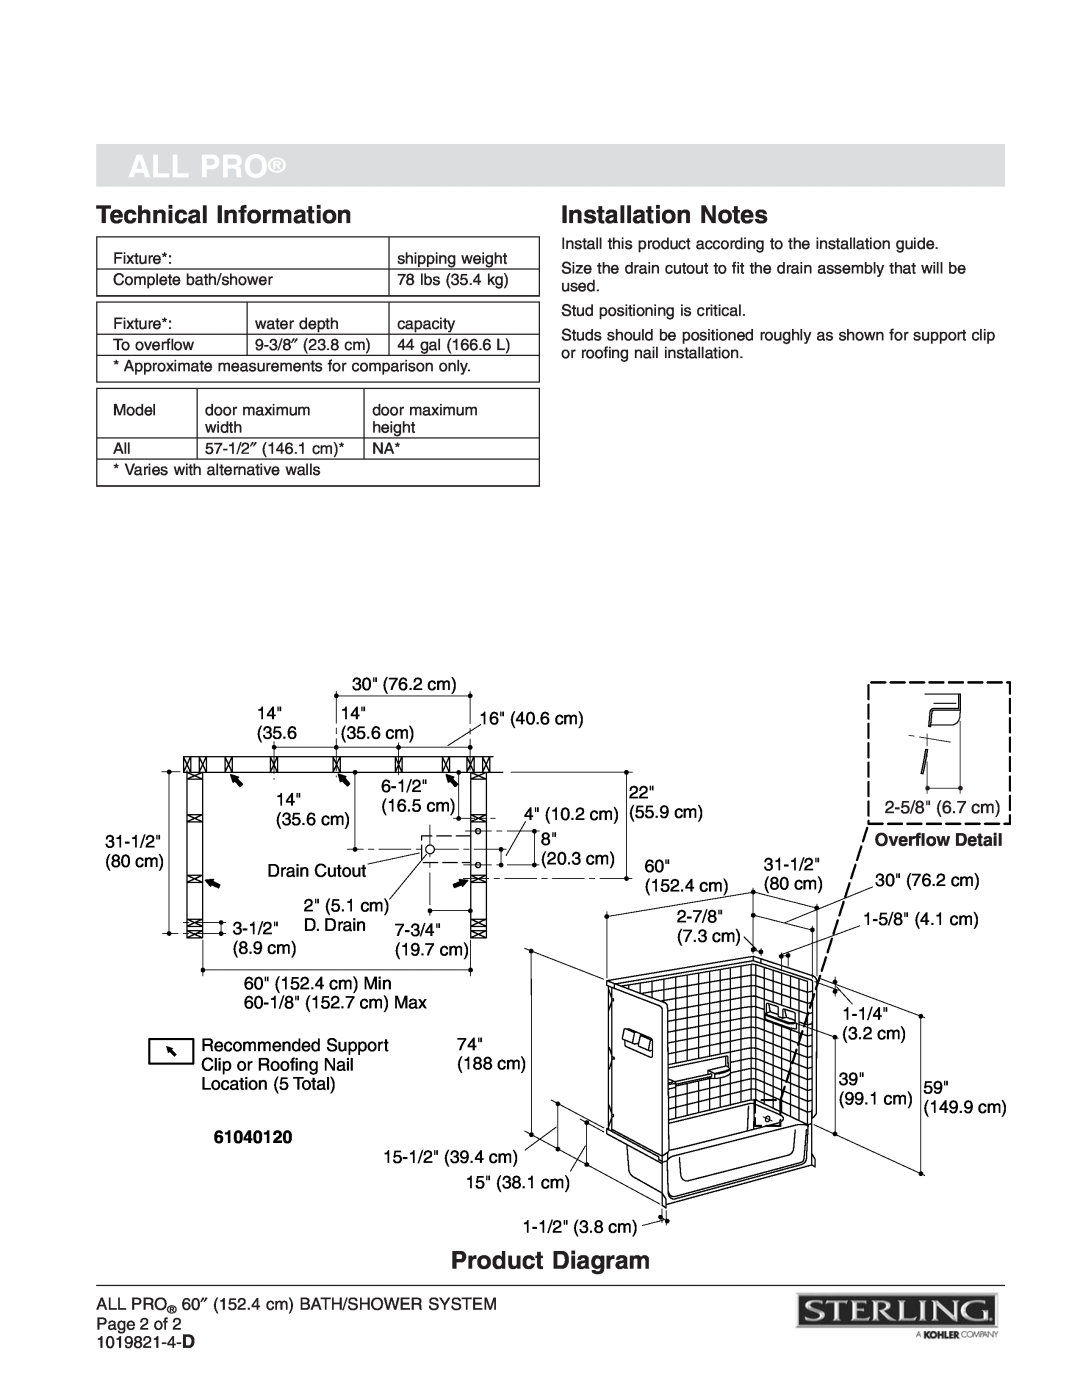 Sterling Plumbing 61040120, 61040110 Technical Information, Installation Notes, Product Diagram, 2-5/8 6.7 cm, All Pro 